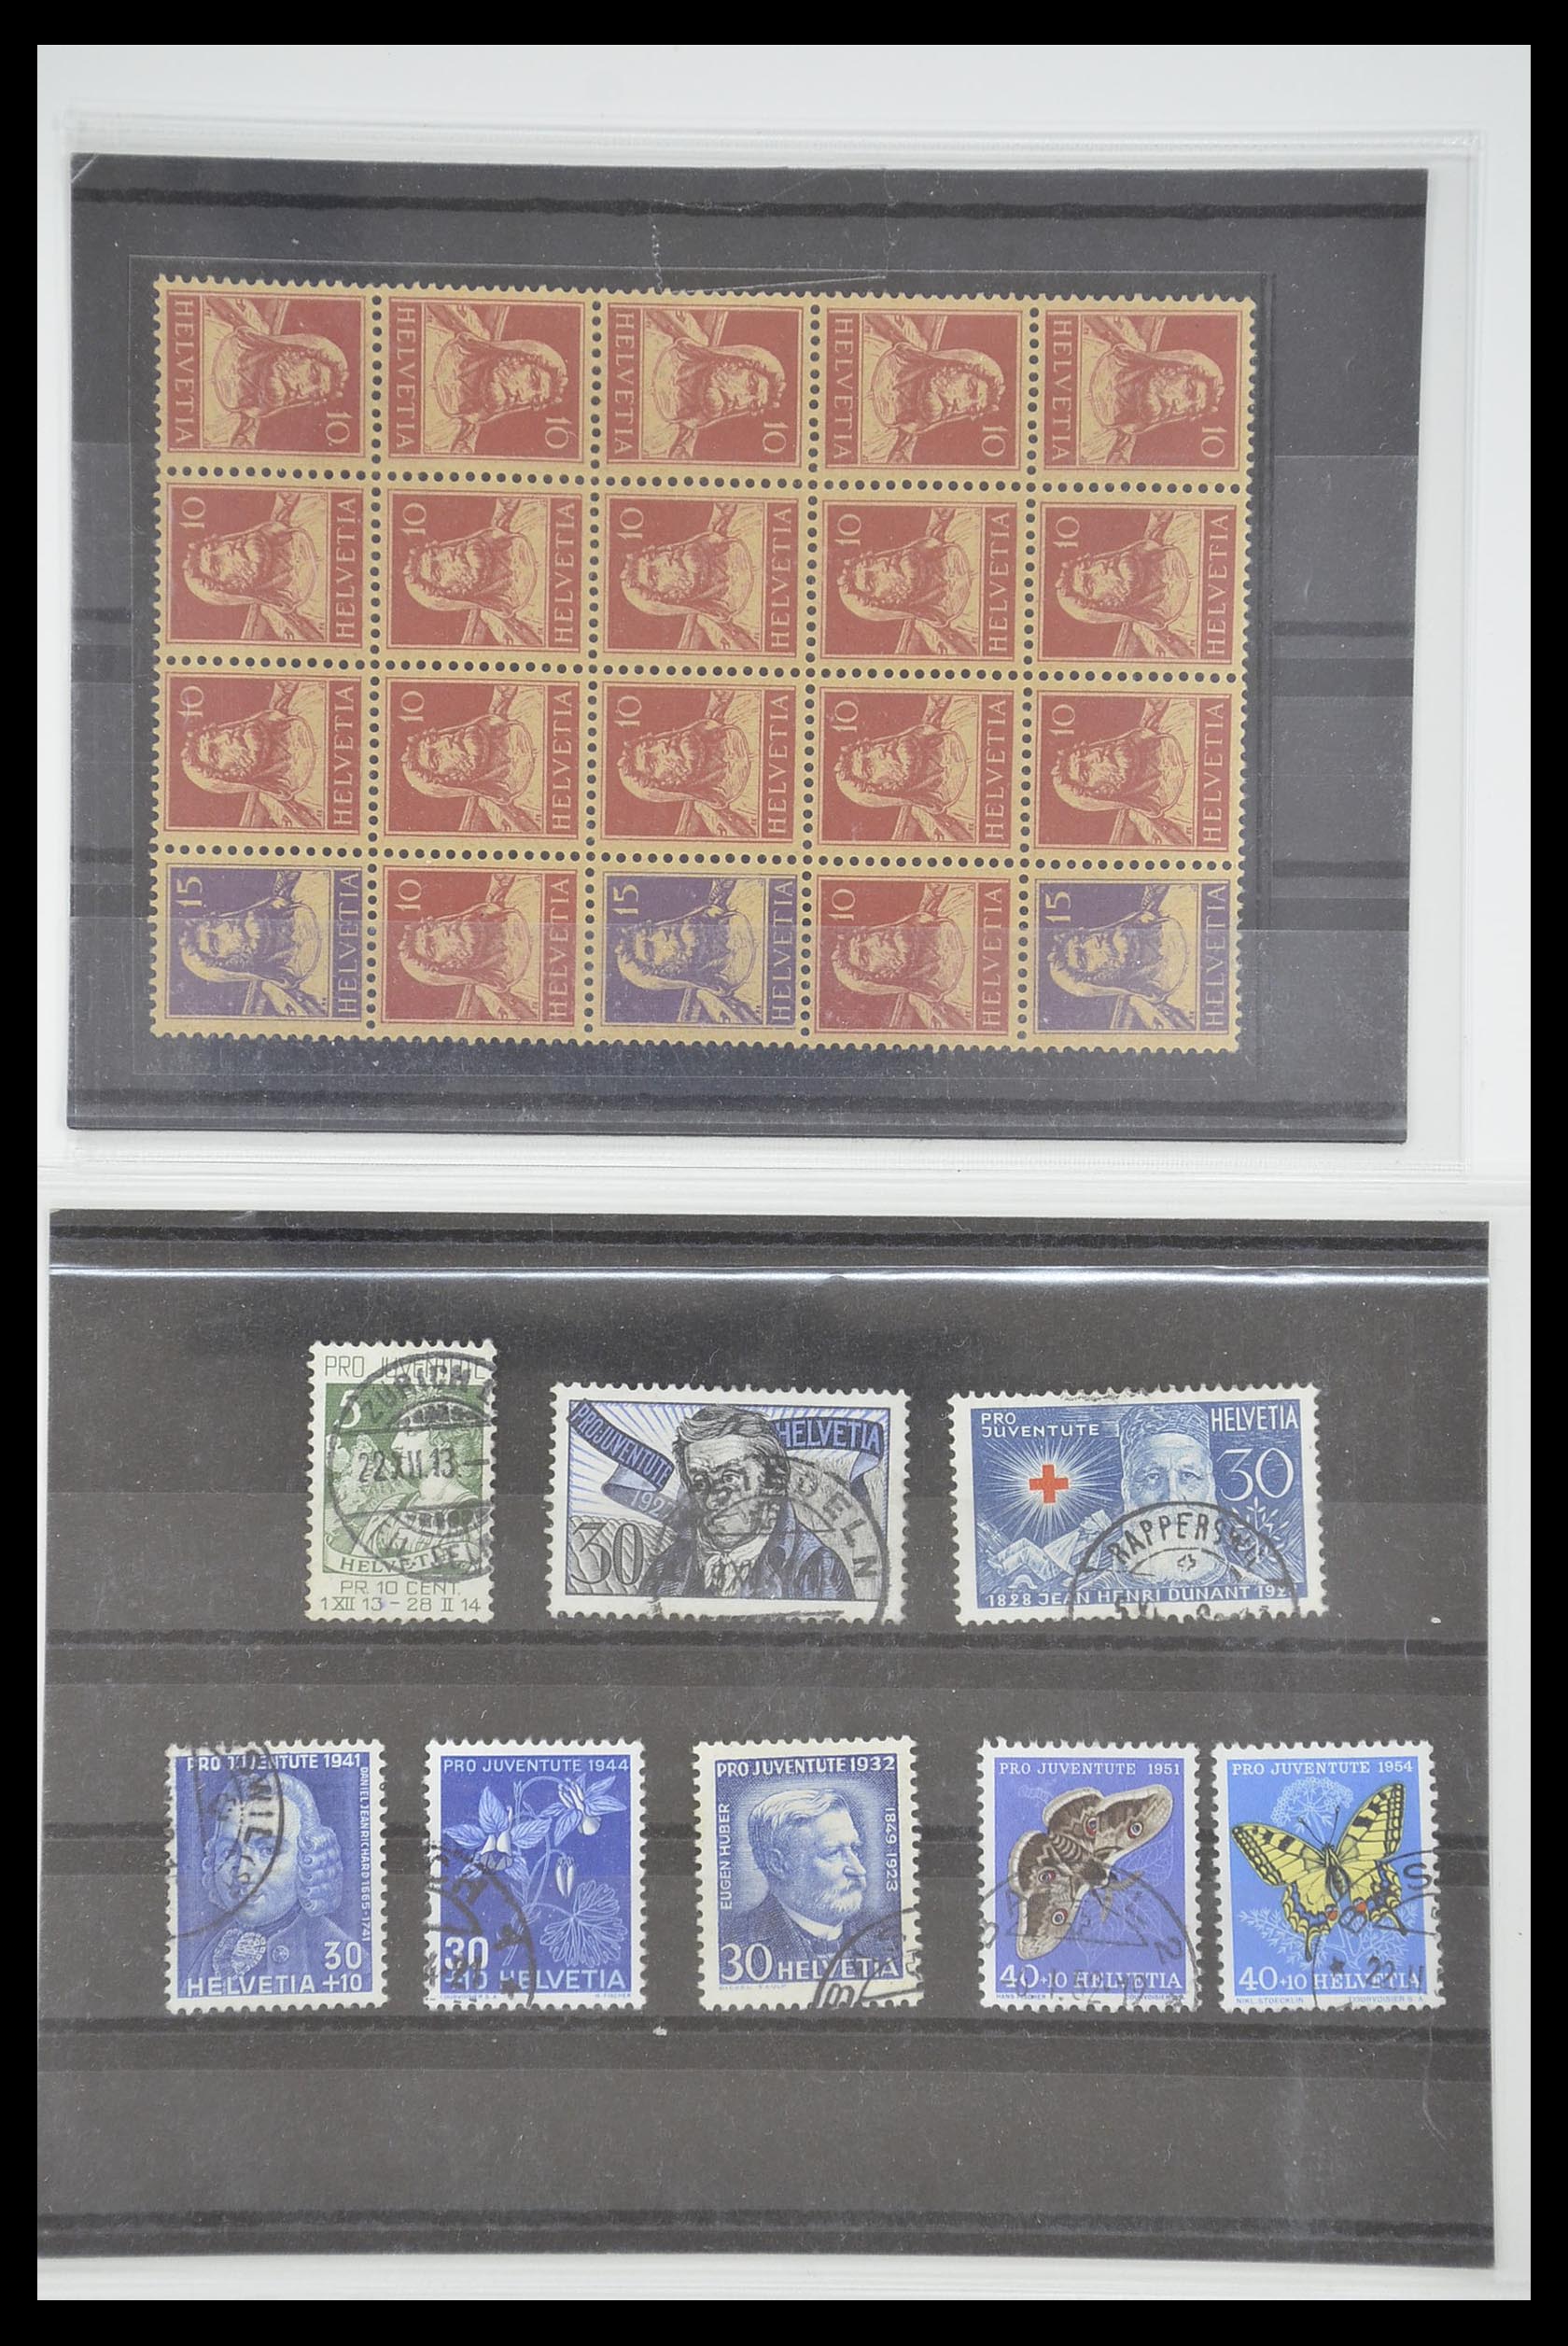 33284 012 - Stamp collection 33284 Switzerland better issues 1900-1995.